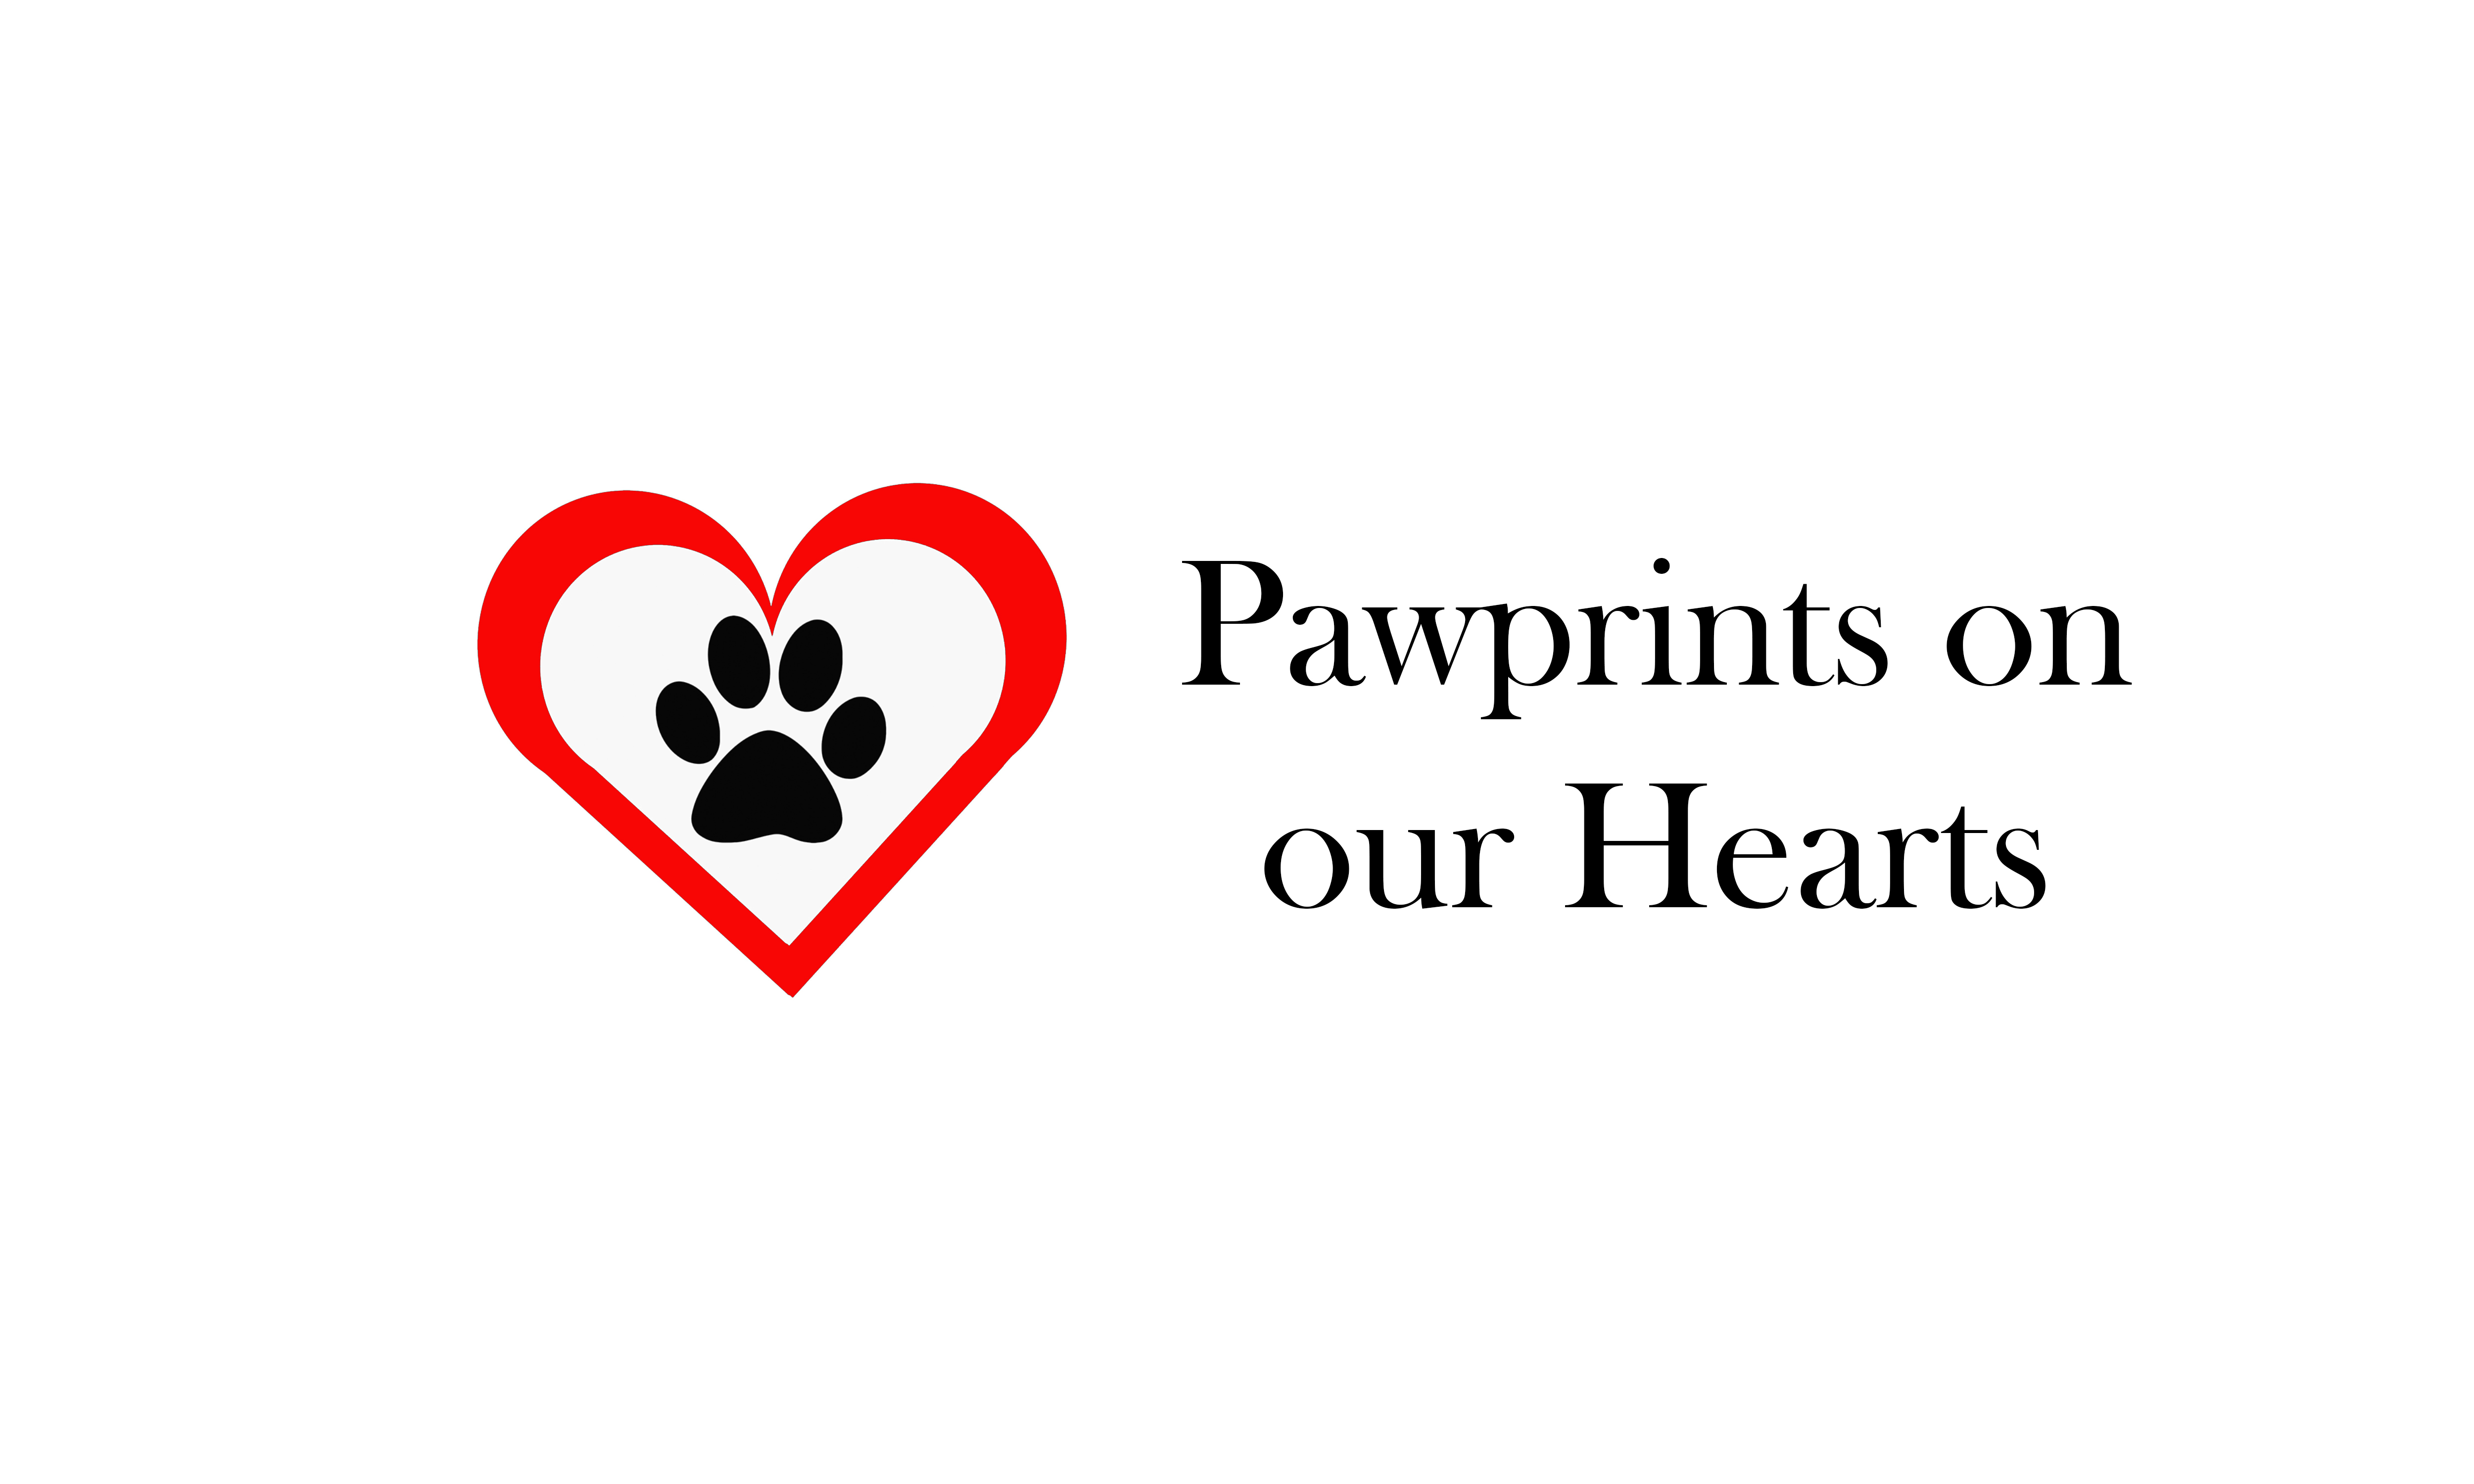 Pawprints on our Hearts